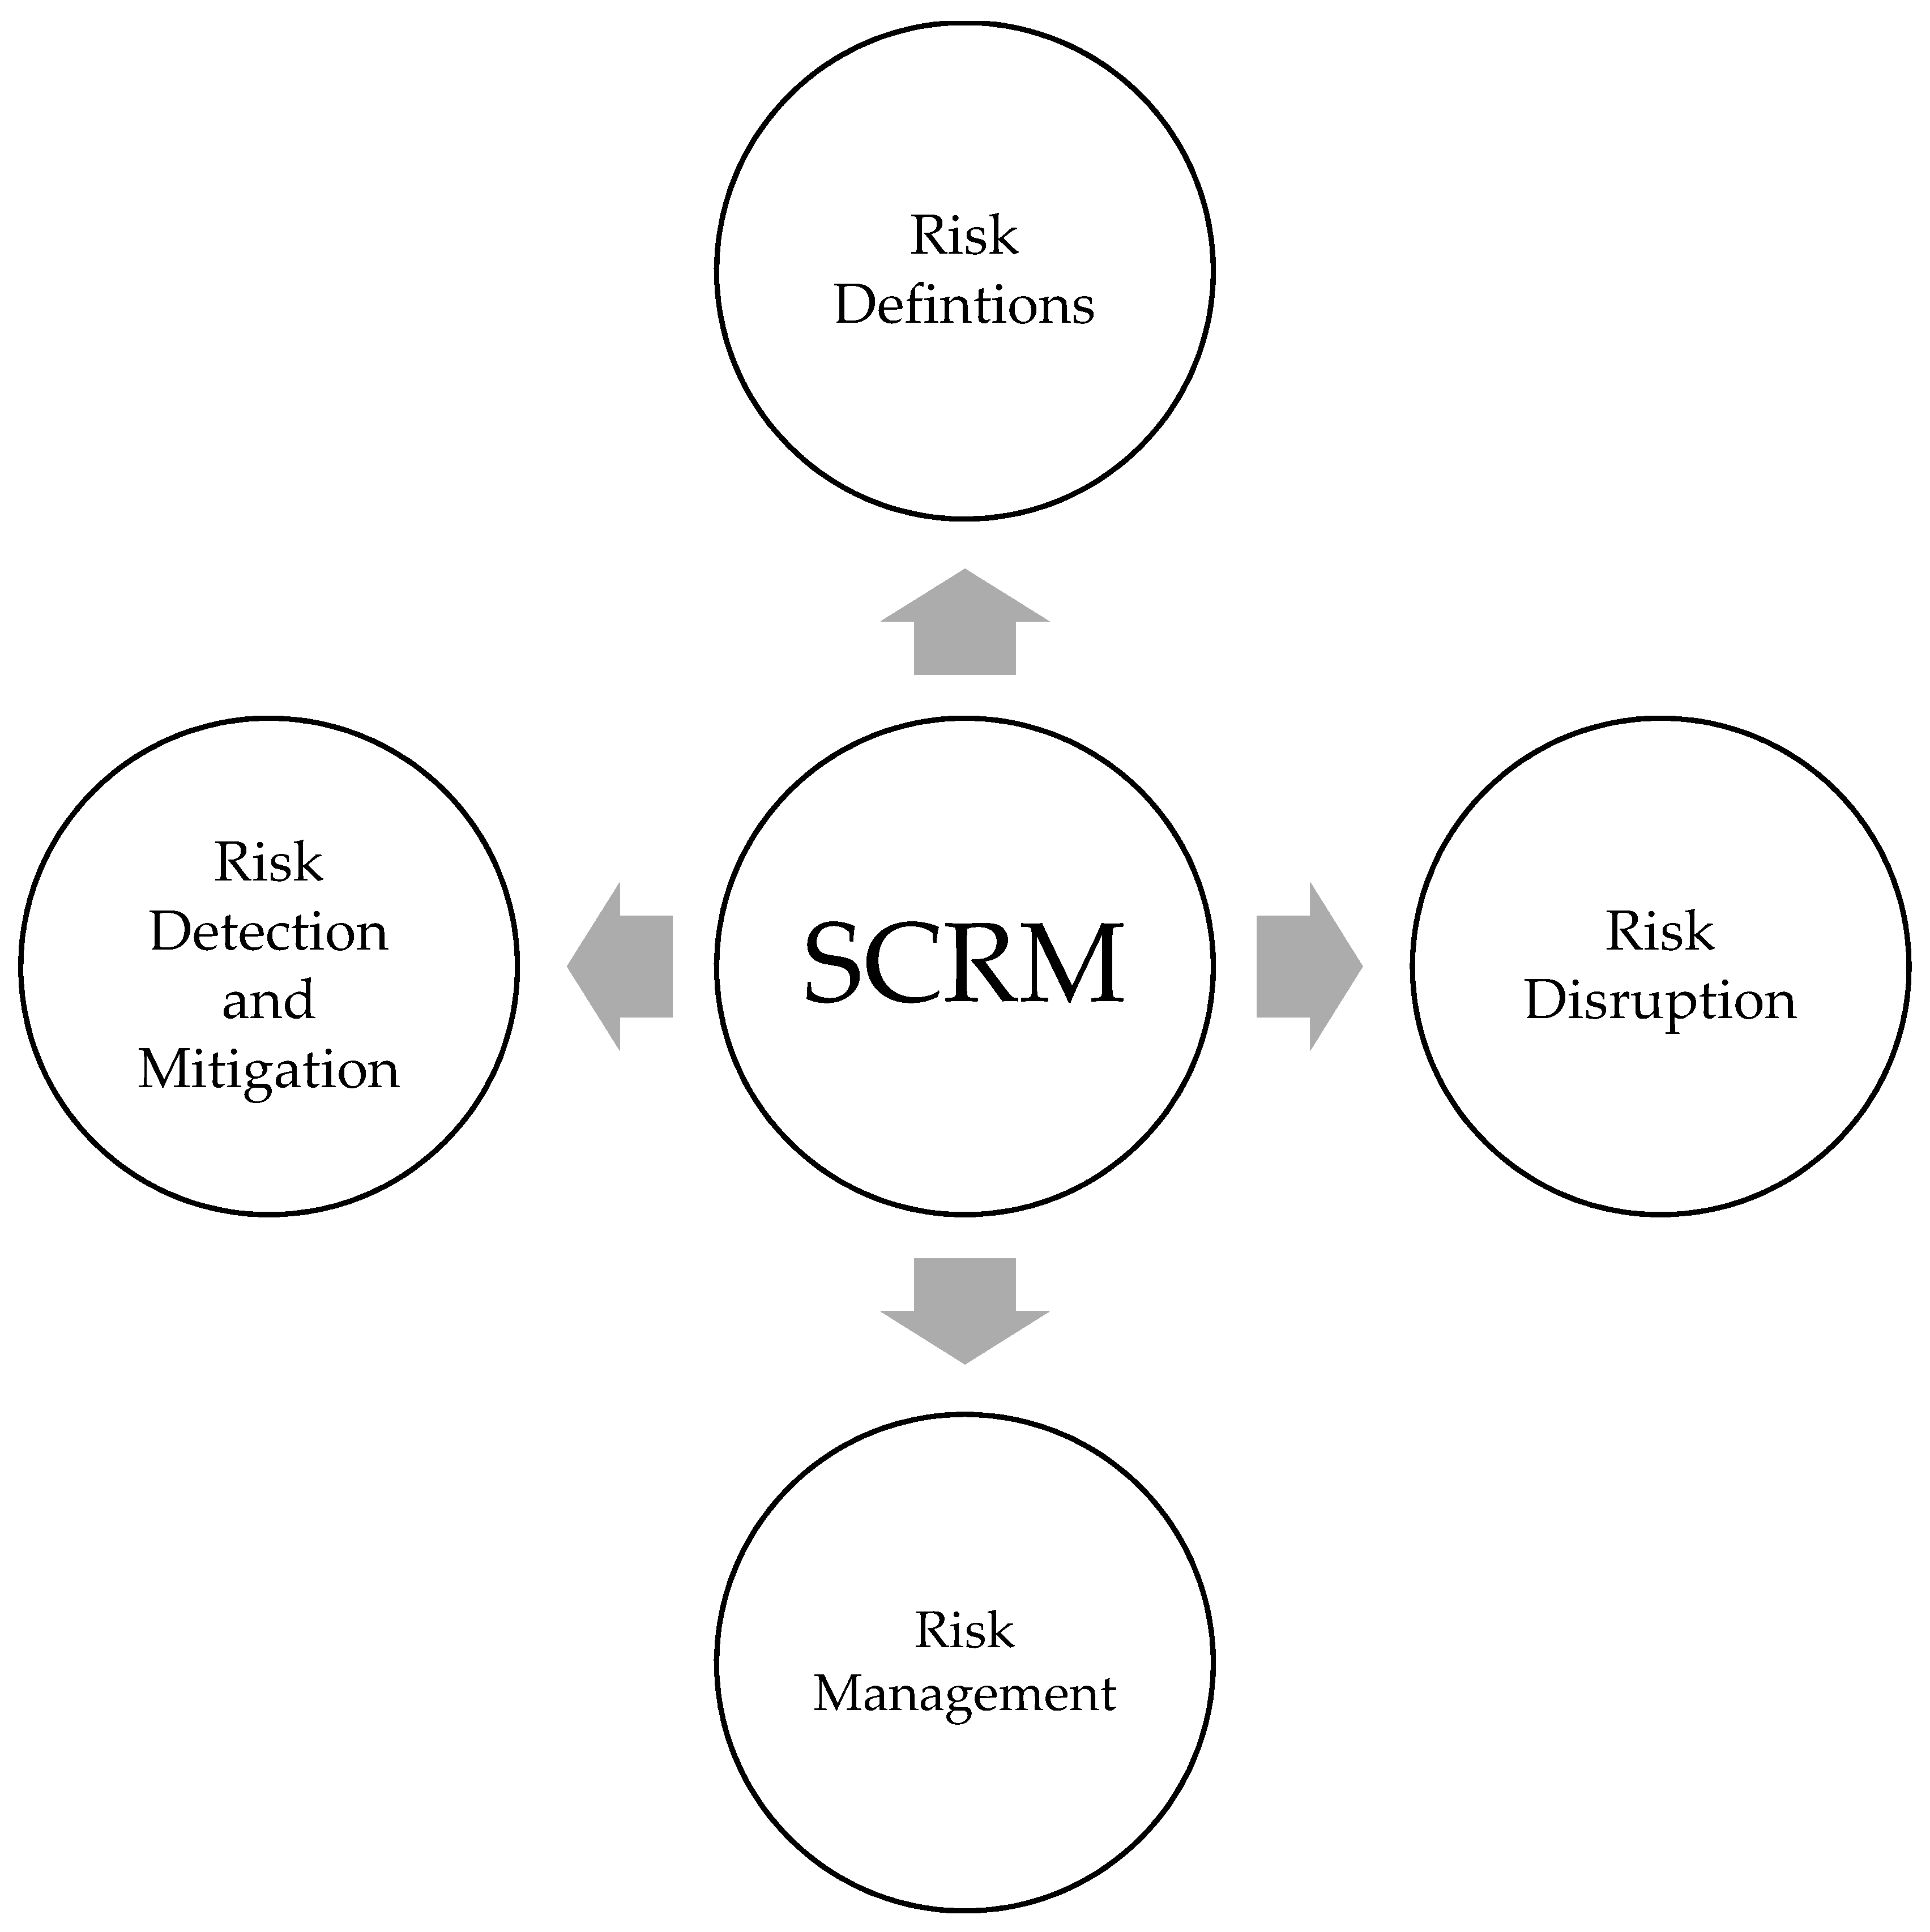 literature review on the basic components and risks of supply chain management (scm)